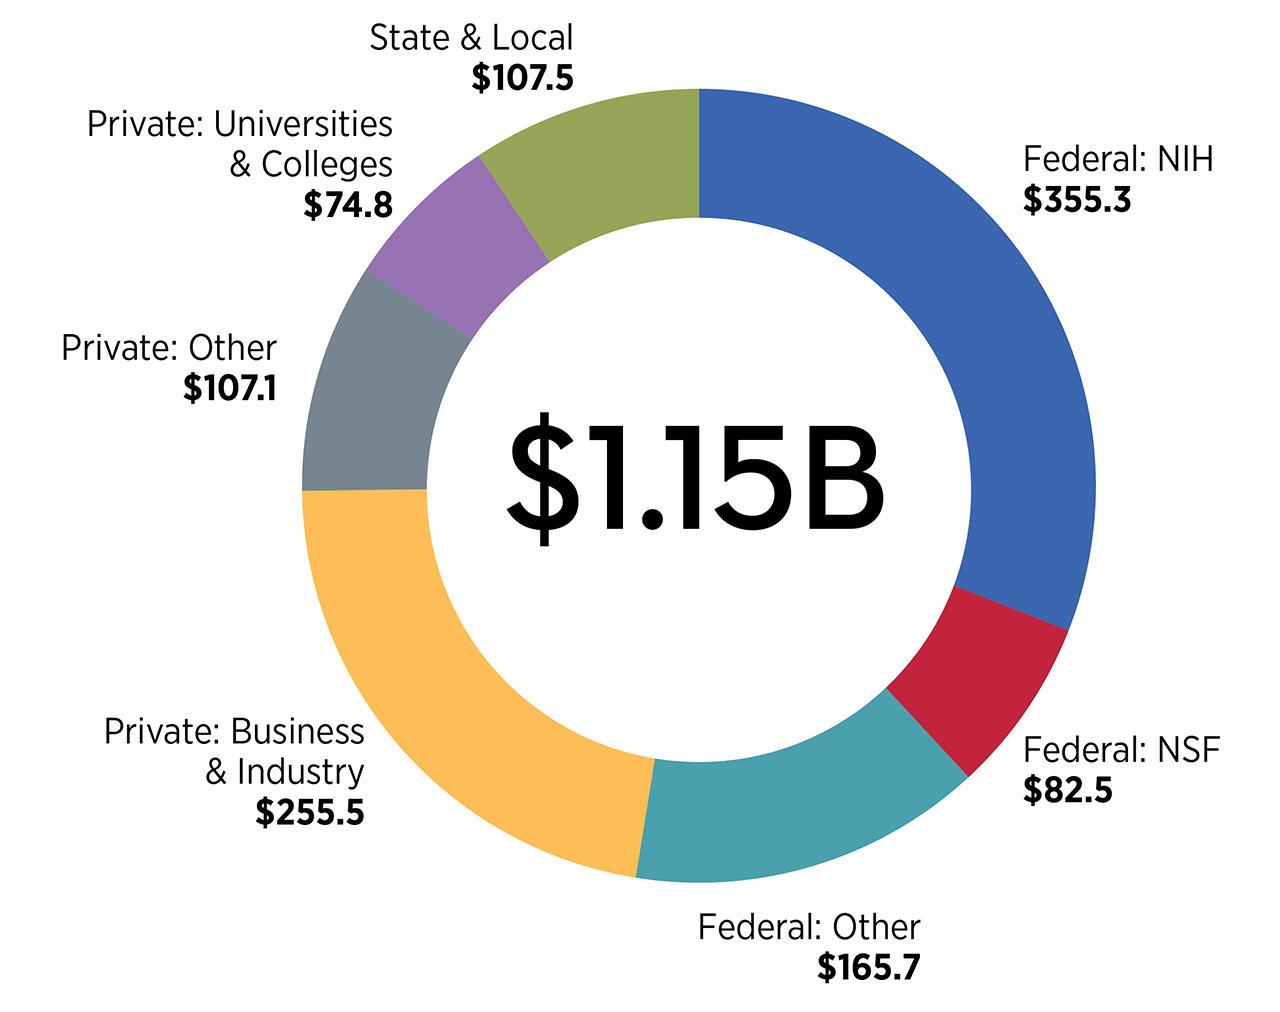 Alt Text: Funding sources: $355M Federal NIH; $83M Federal-NSF; $166M Federal-Other; $256M Private-Business/Industry; $107M Private-Other; $75M Private-Universities &amp; Colleges; $108M State &amp; Local. $1.15B Total.